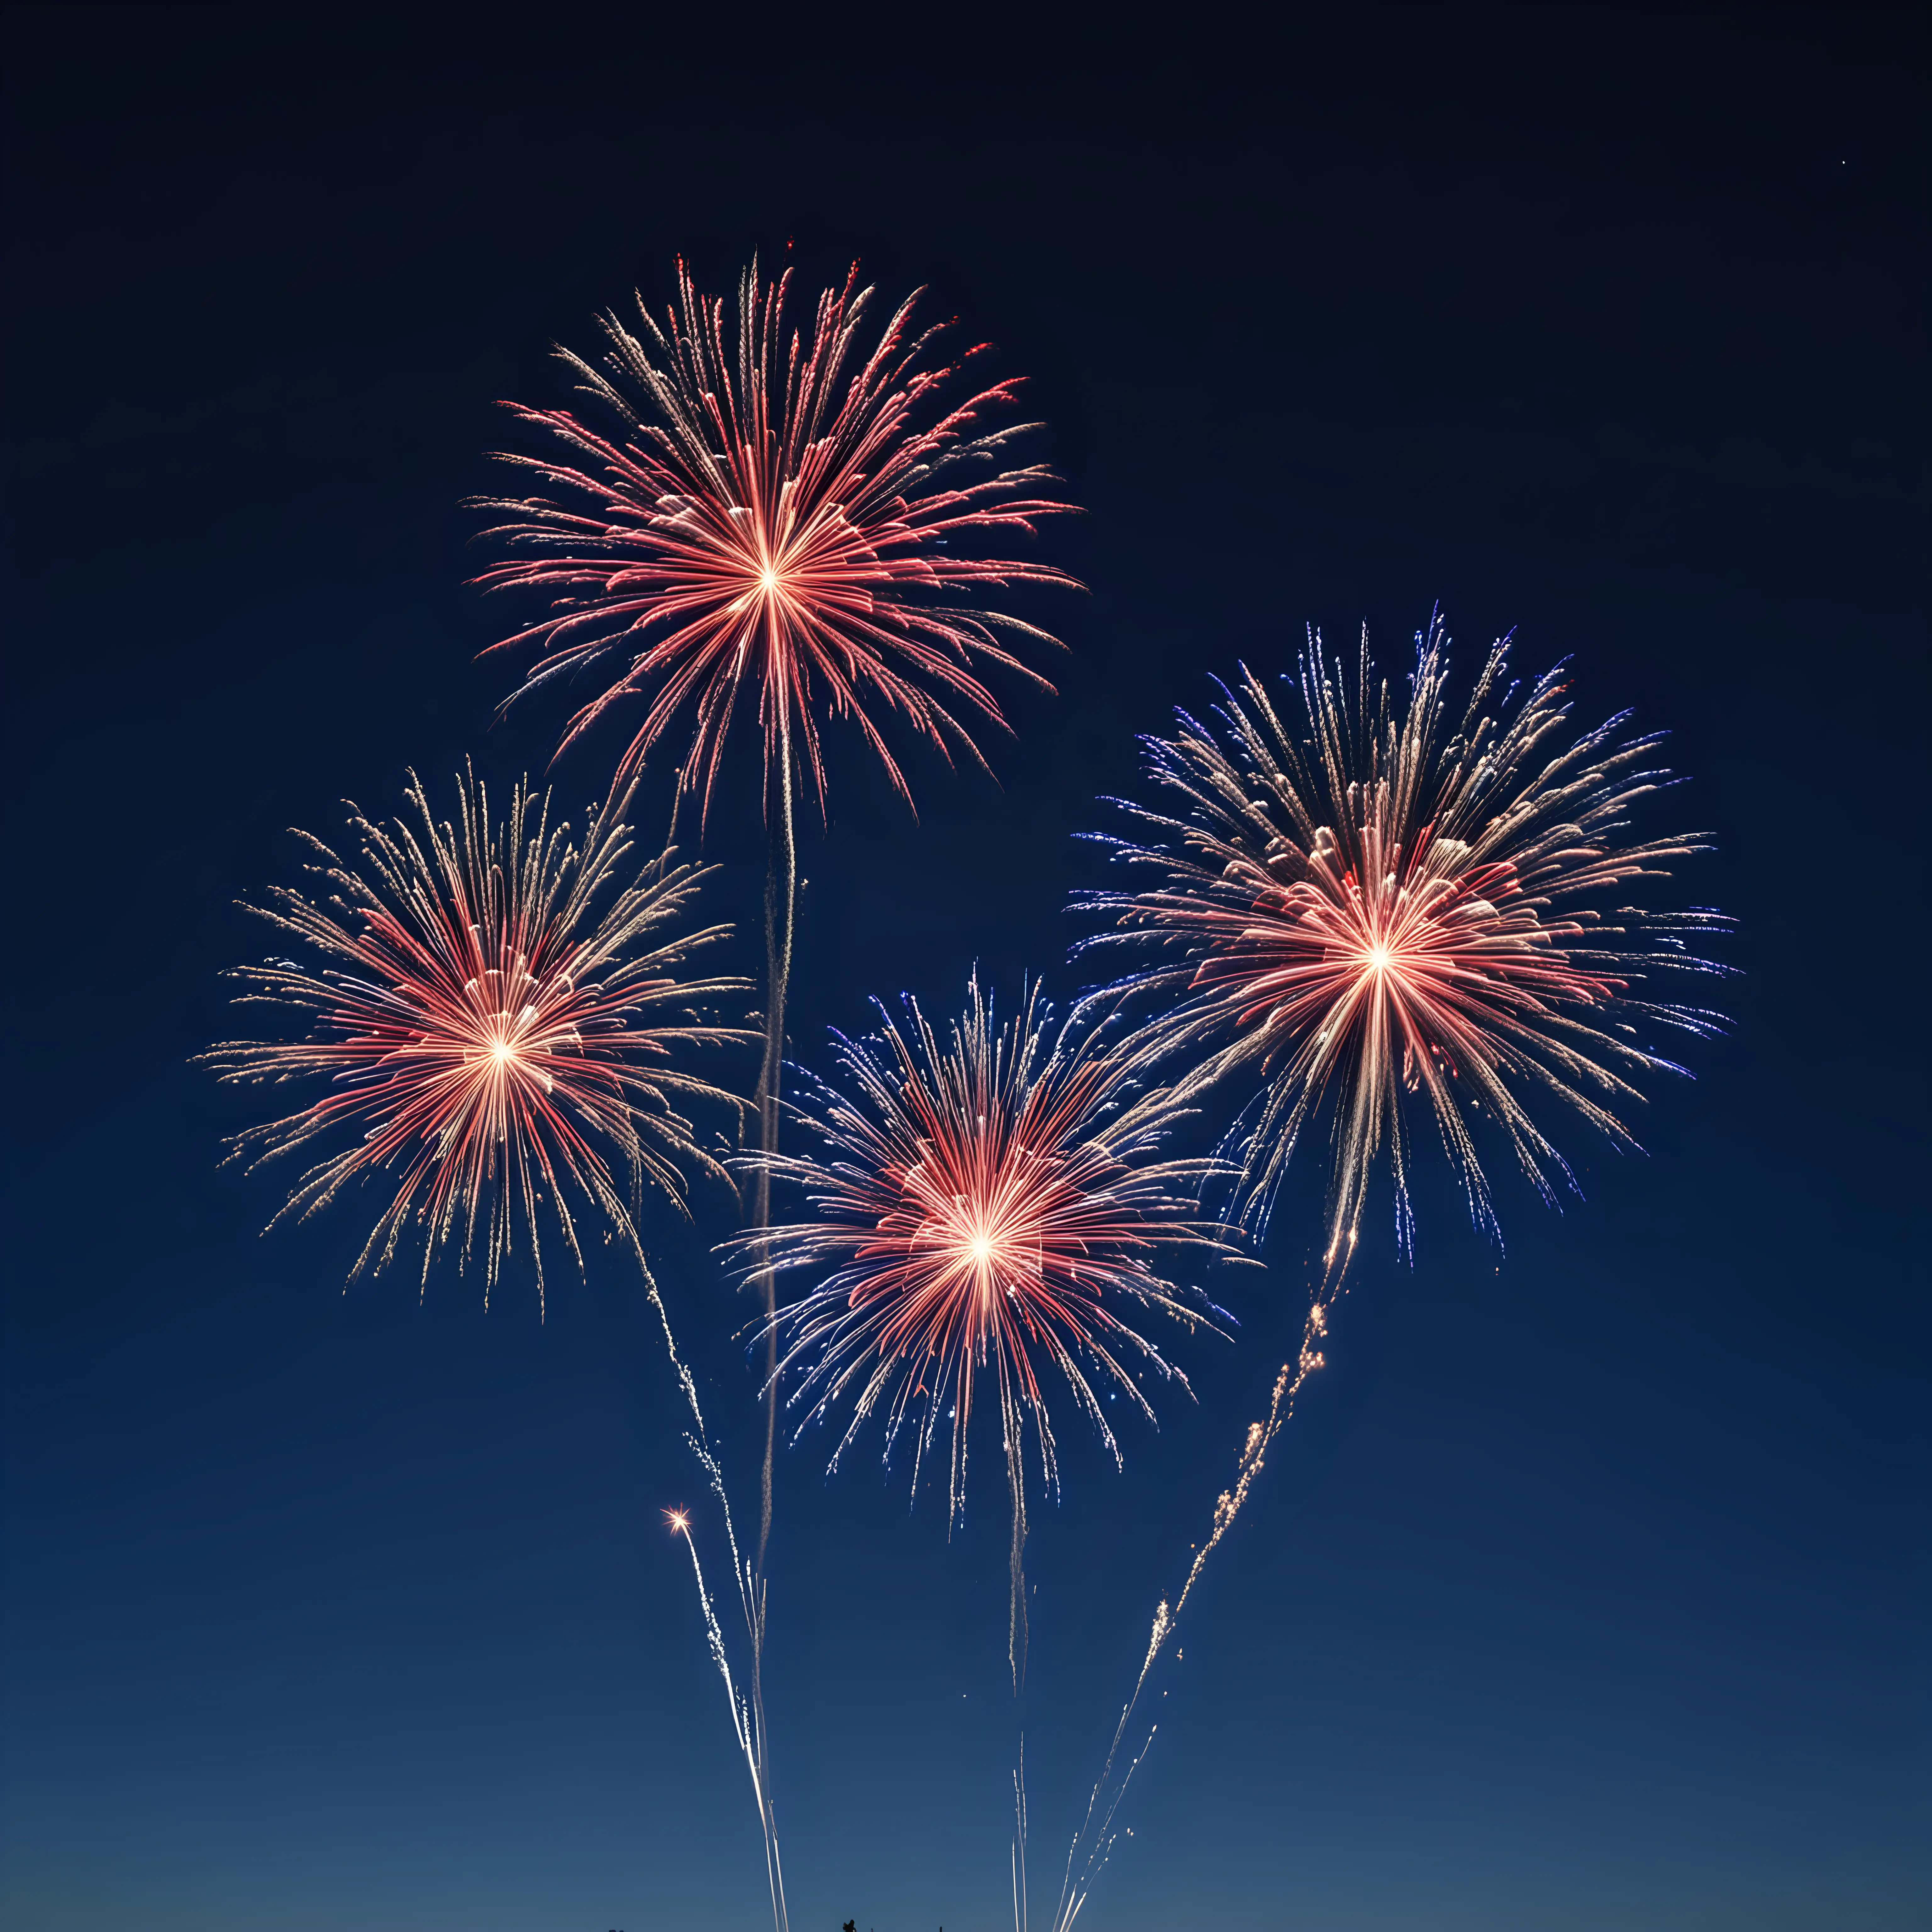 Vivid Glowing Red White and Blue Fireworks in Dark Blue Sky